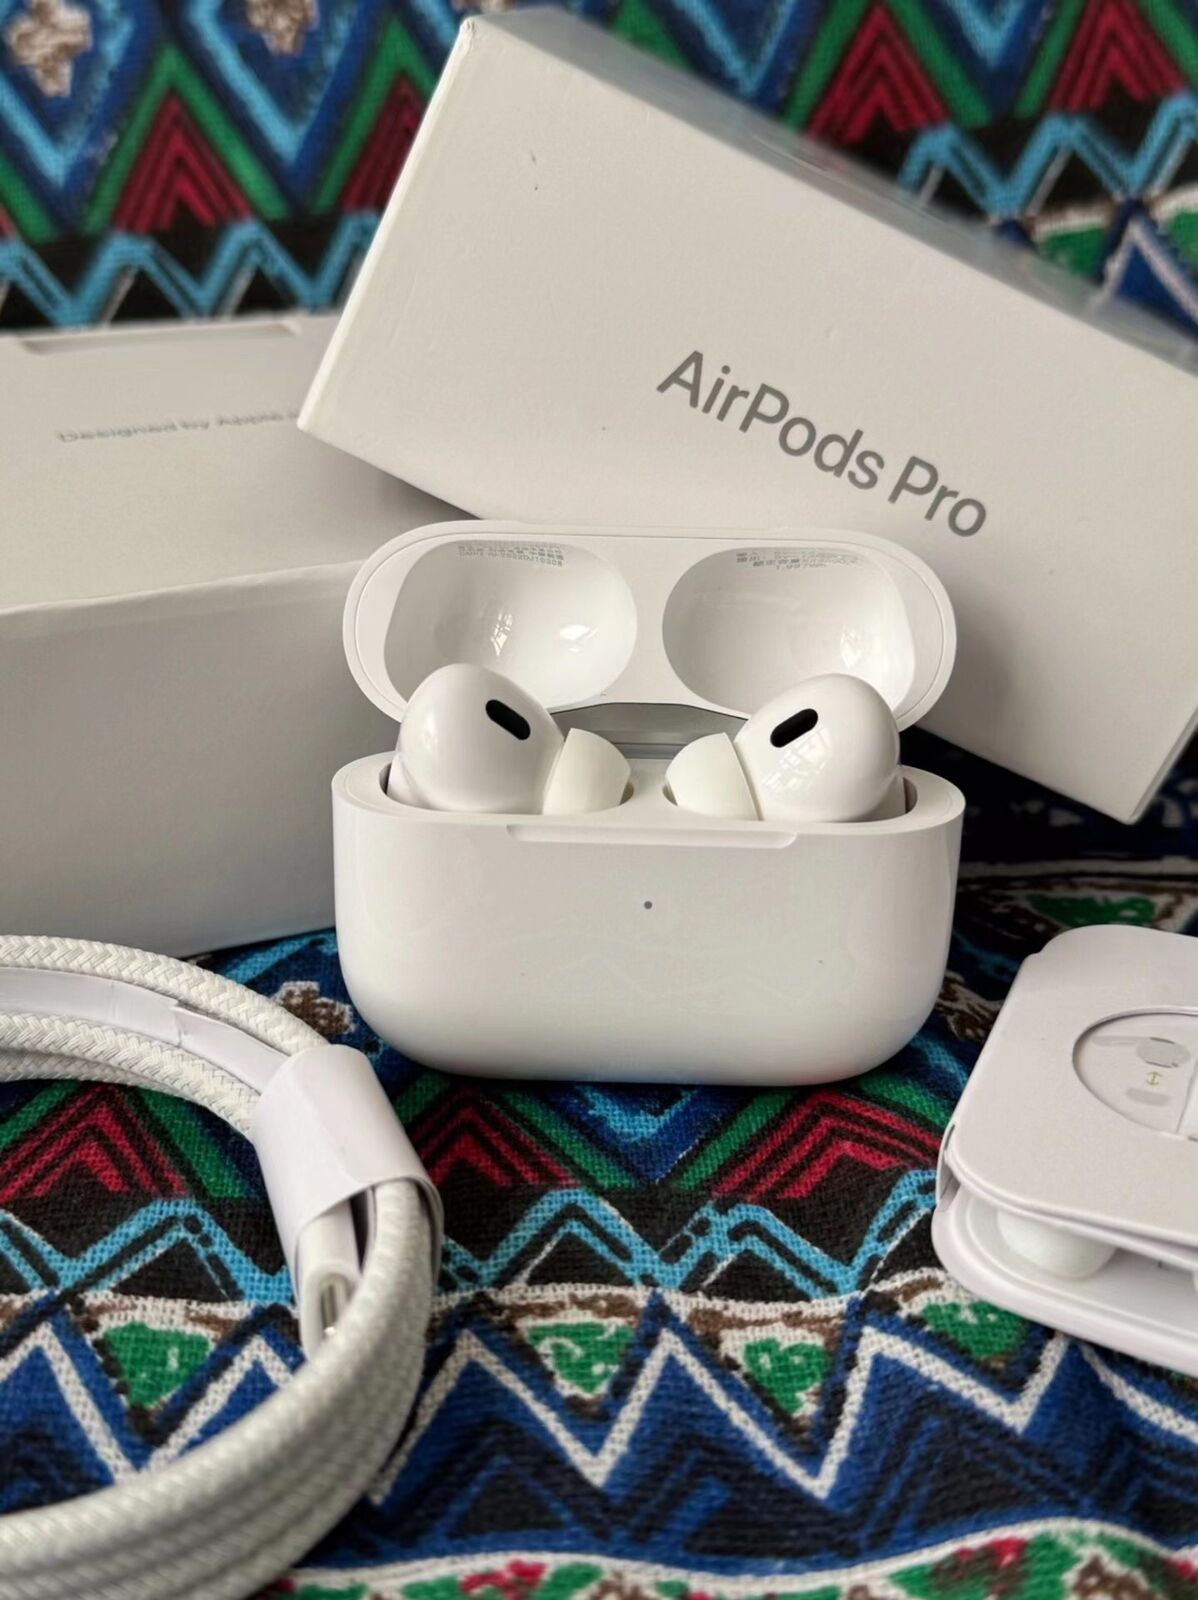 Apple AirPods Pro (2nd Generation) Wireless Earbuds with MagSafe Charging Case	√